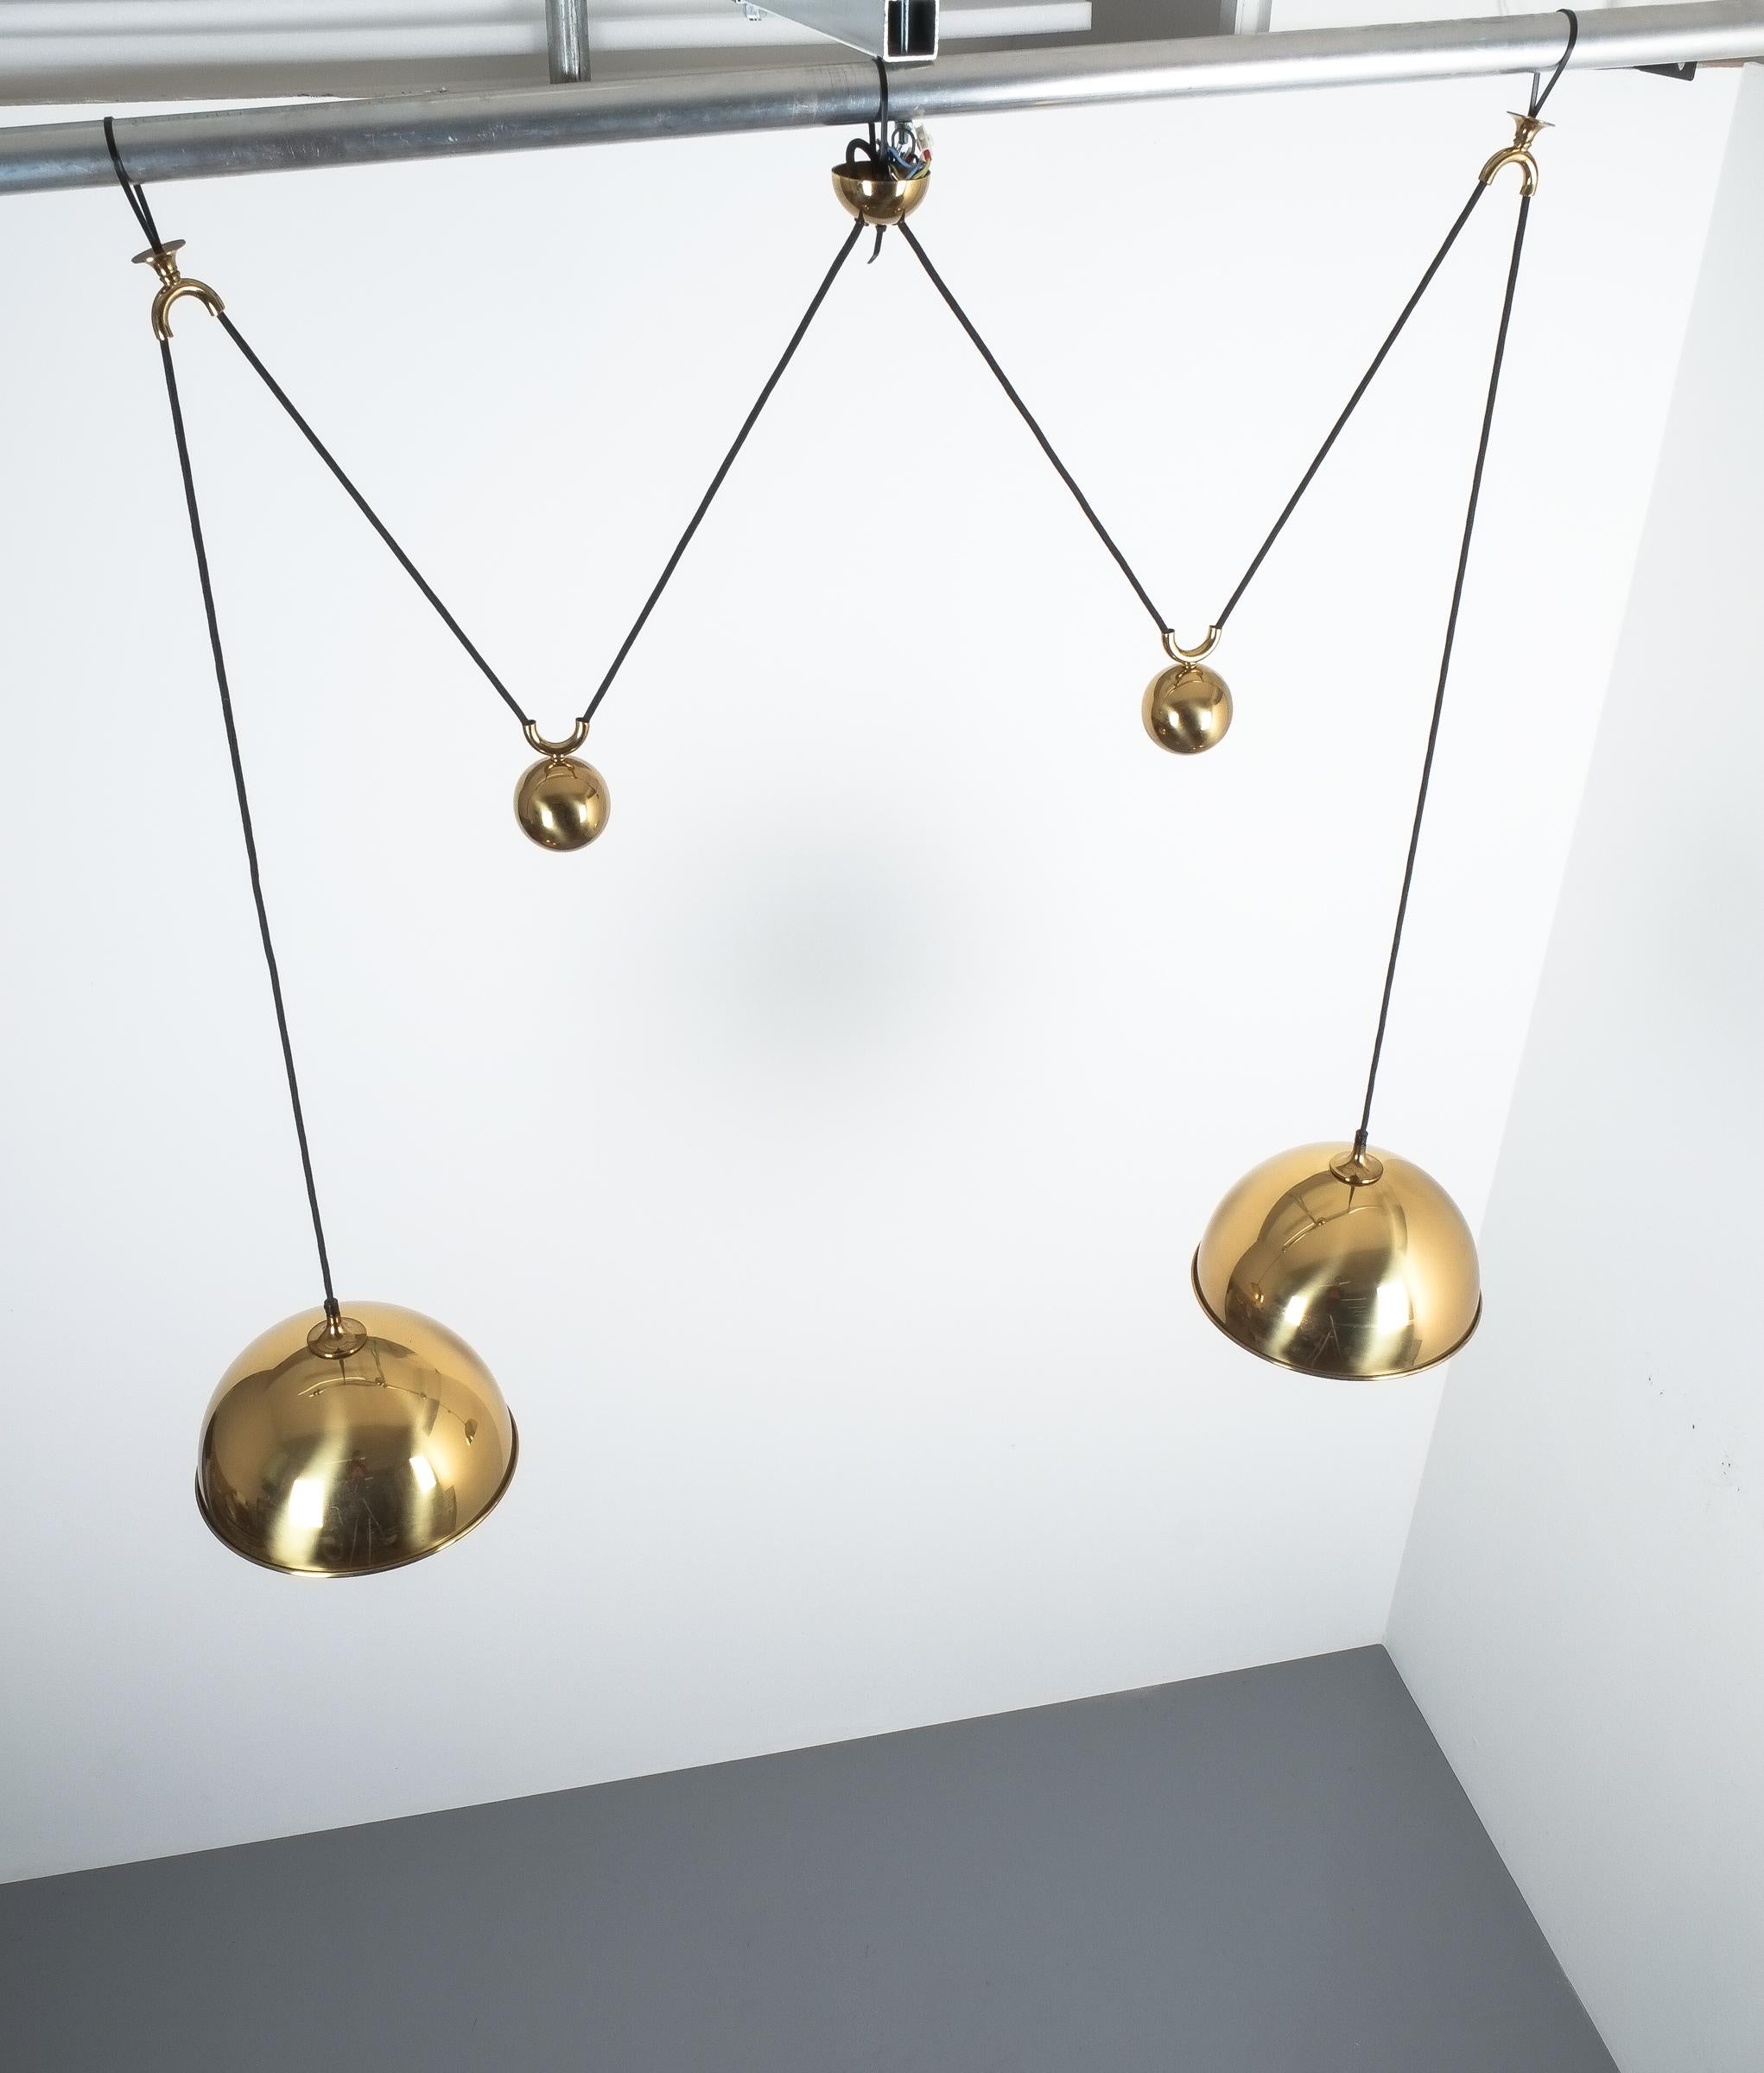 Large Adjustable Brass Counterweight Pendant Lamp by Florian Schulz 2